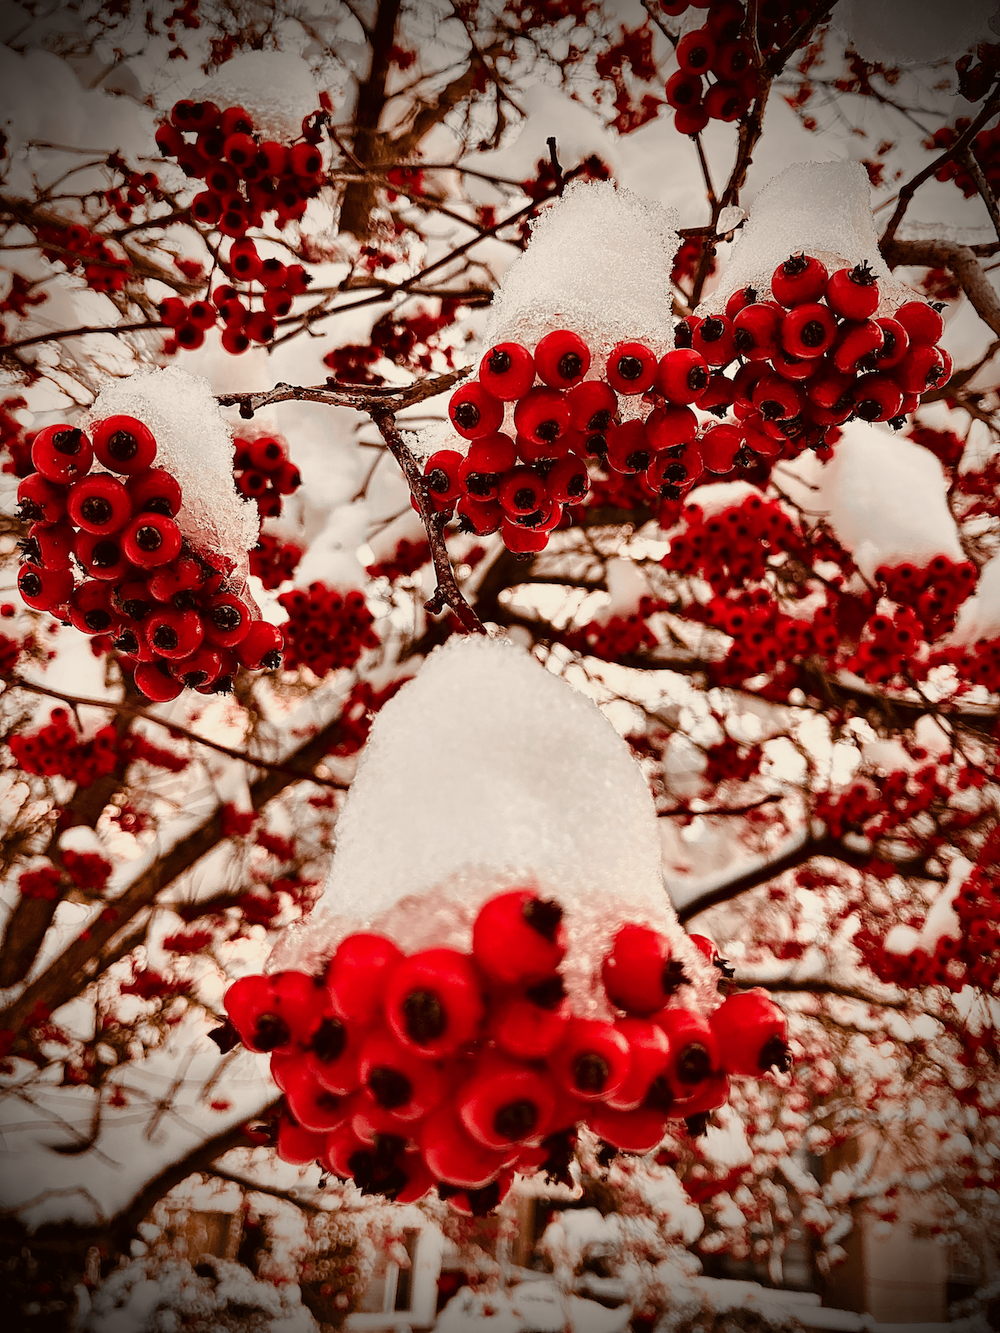 Nature’s holiday bells